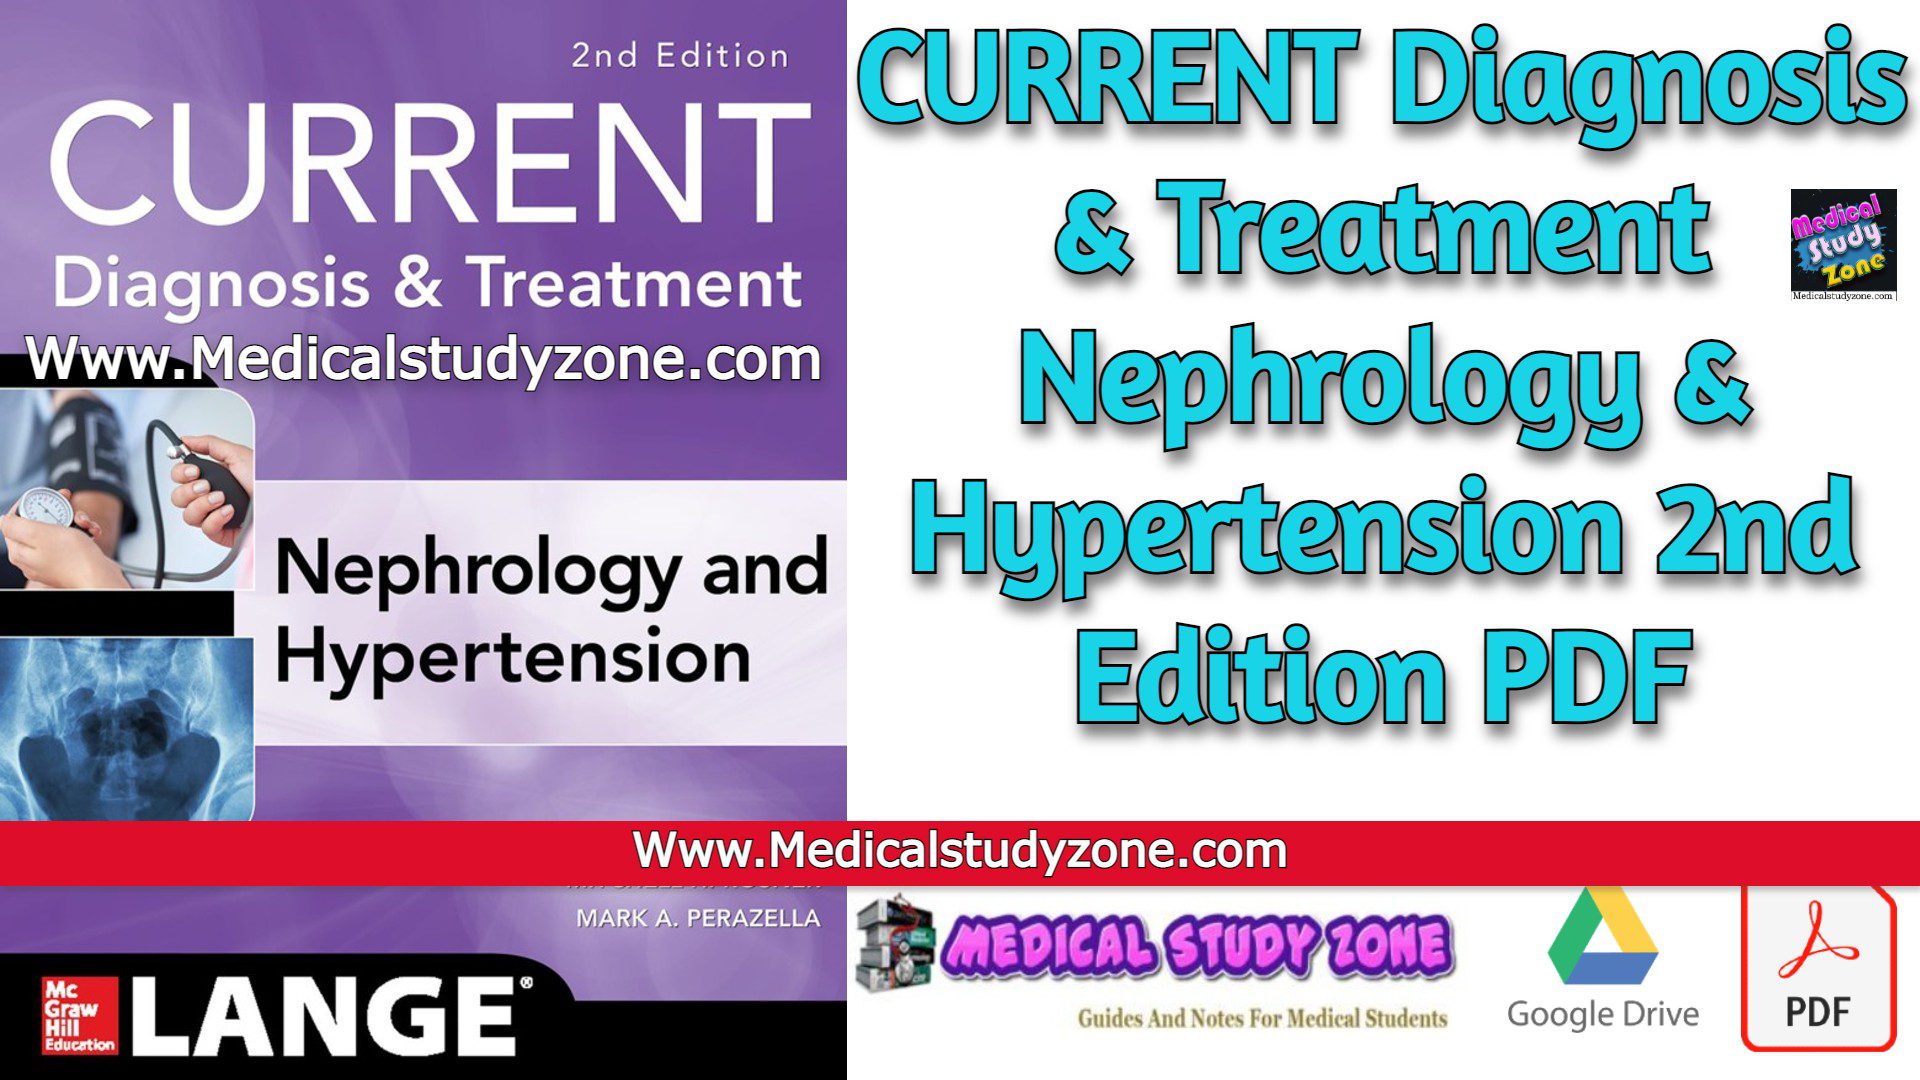 Download CURRENT Diagnosis & Treatment Nephrology & Hypertension 2nd Edition PDF Free